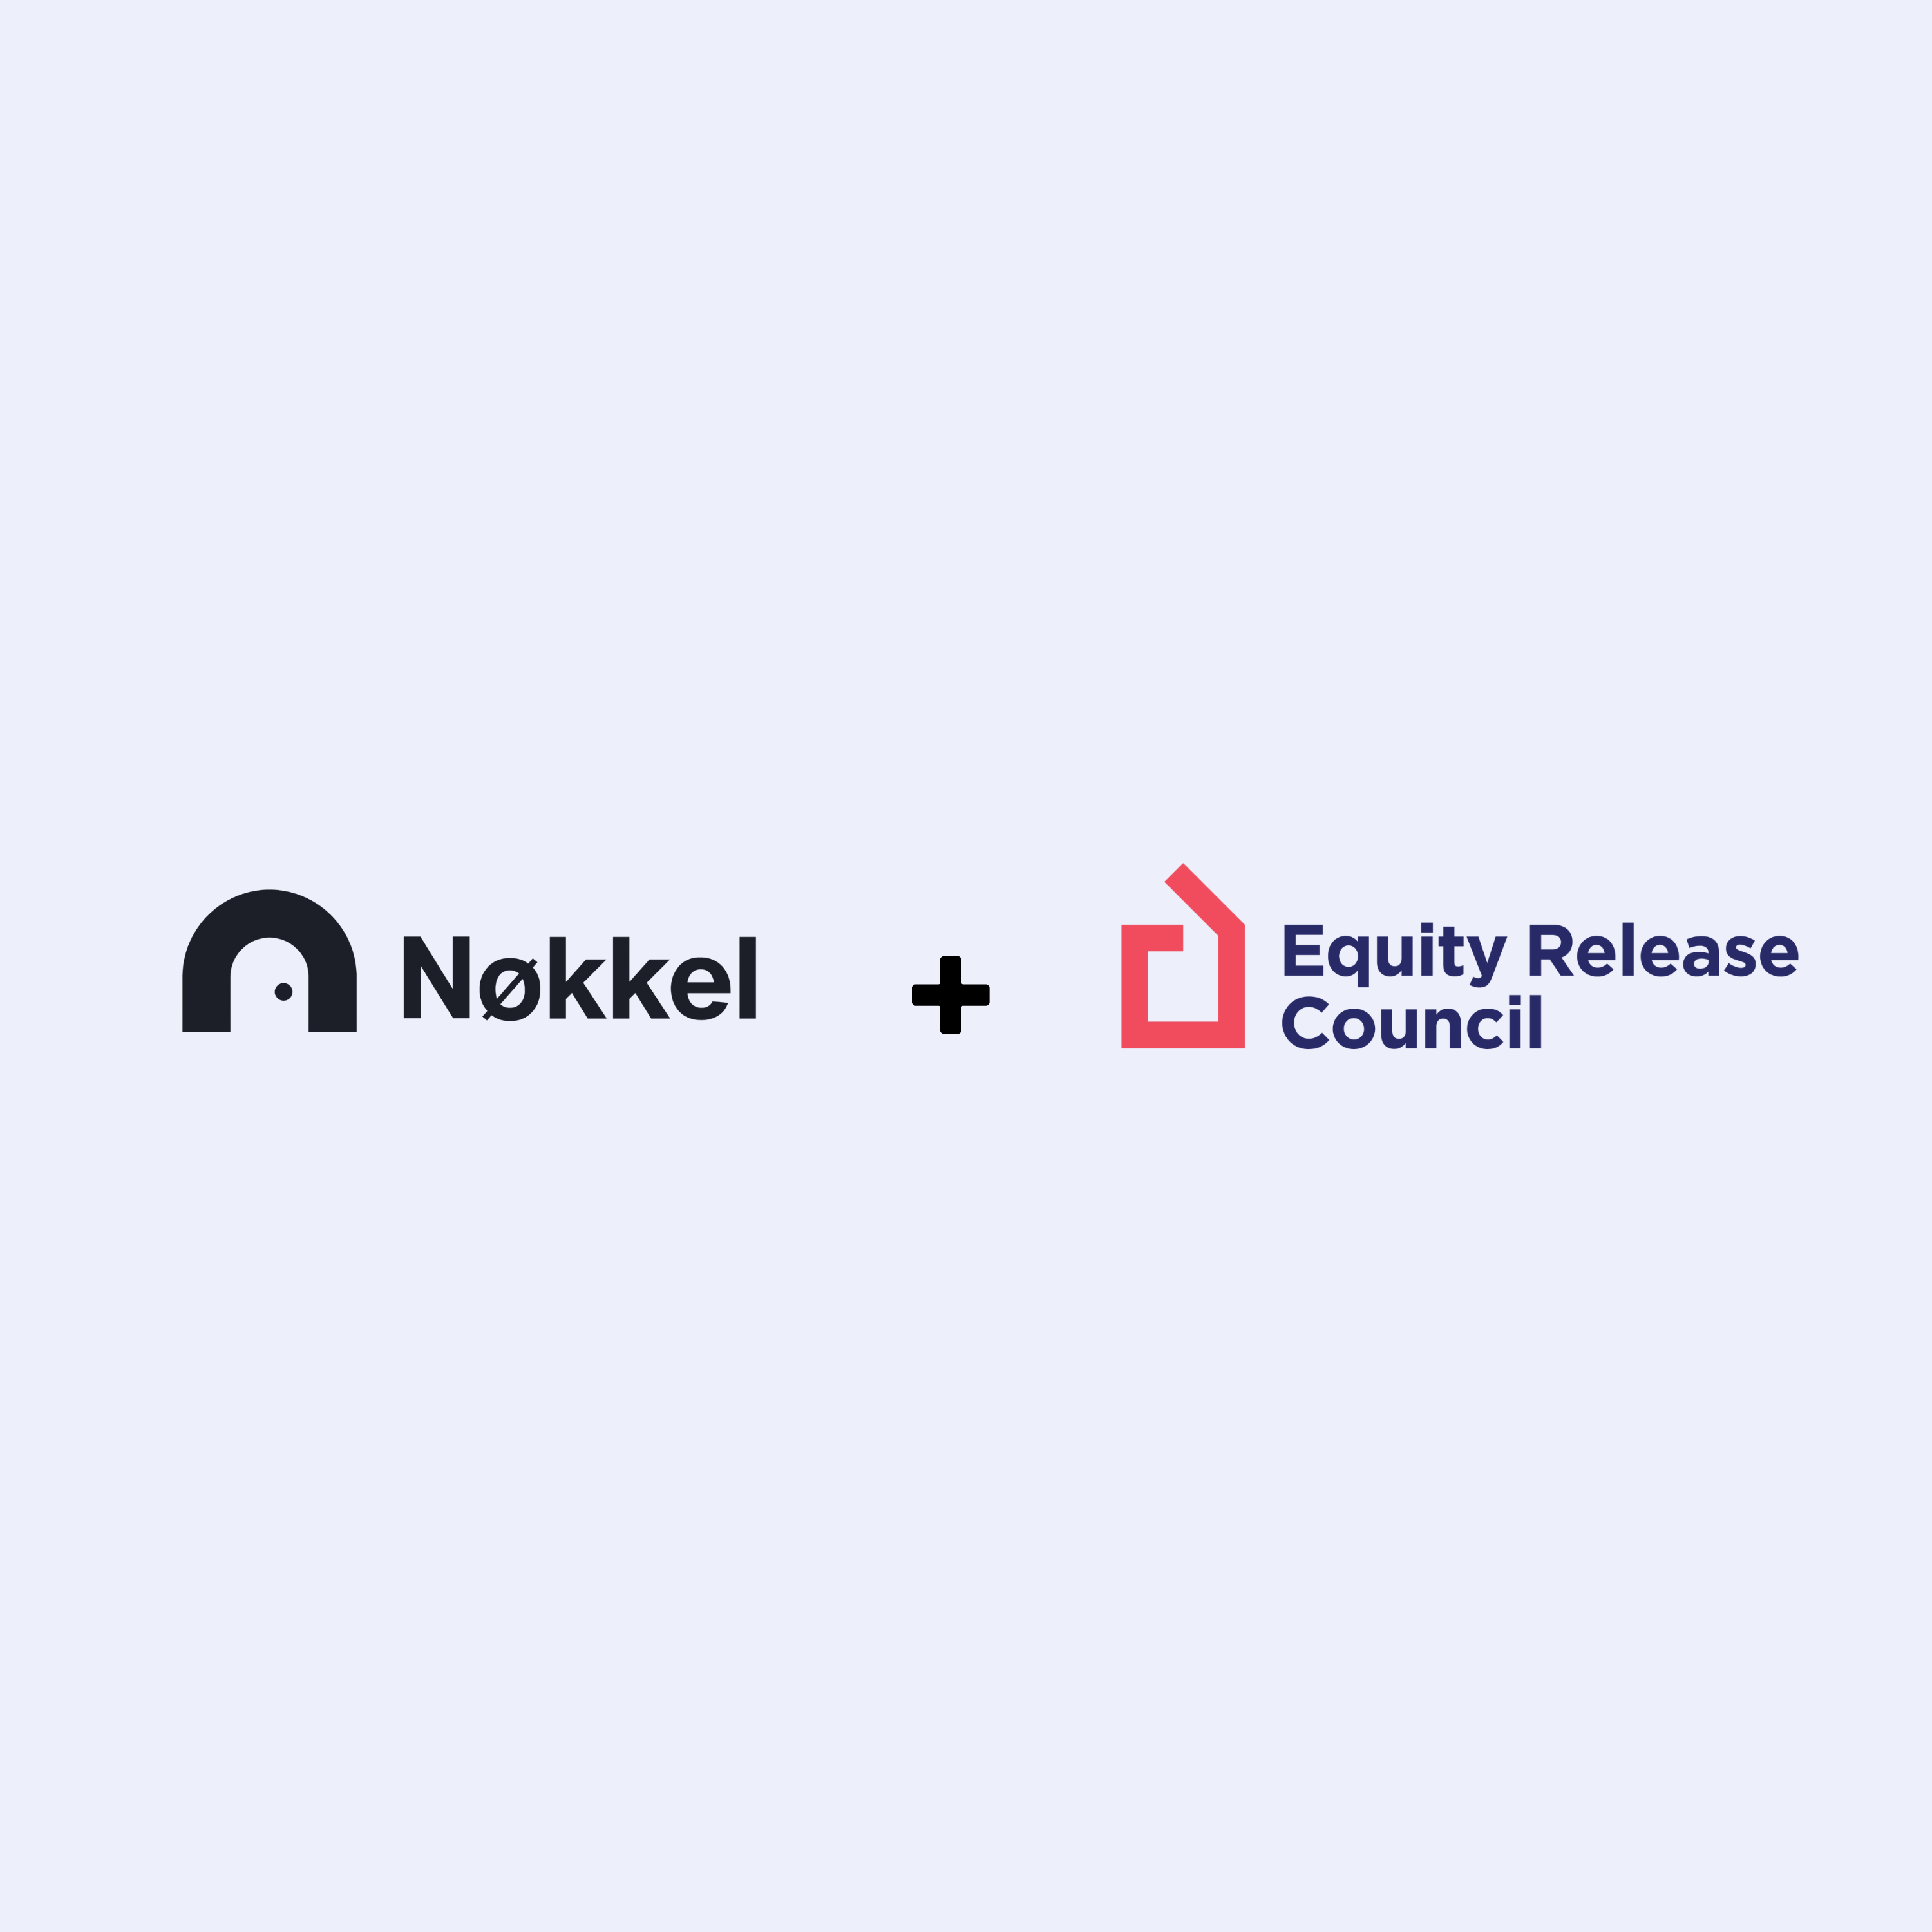 Nokkel joins the Equity Release Council